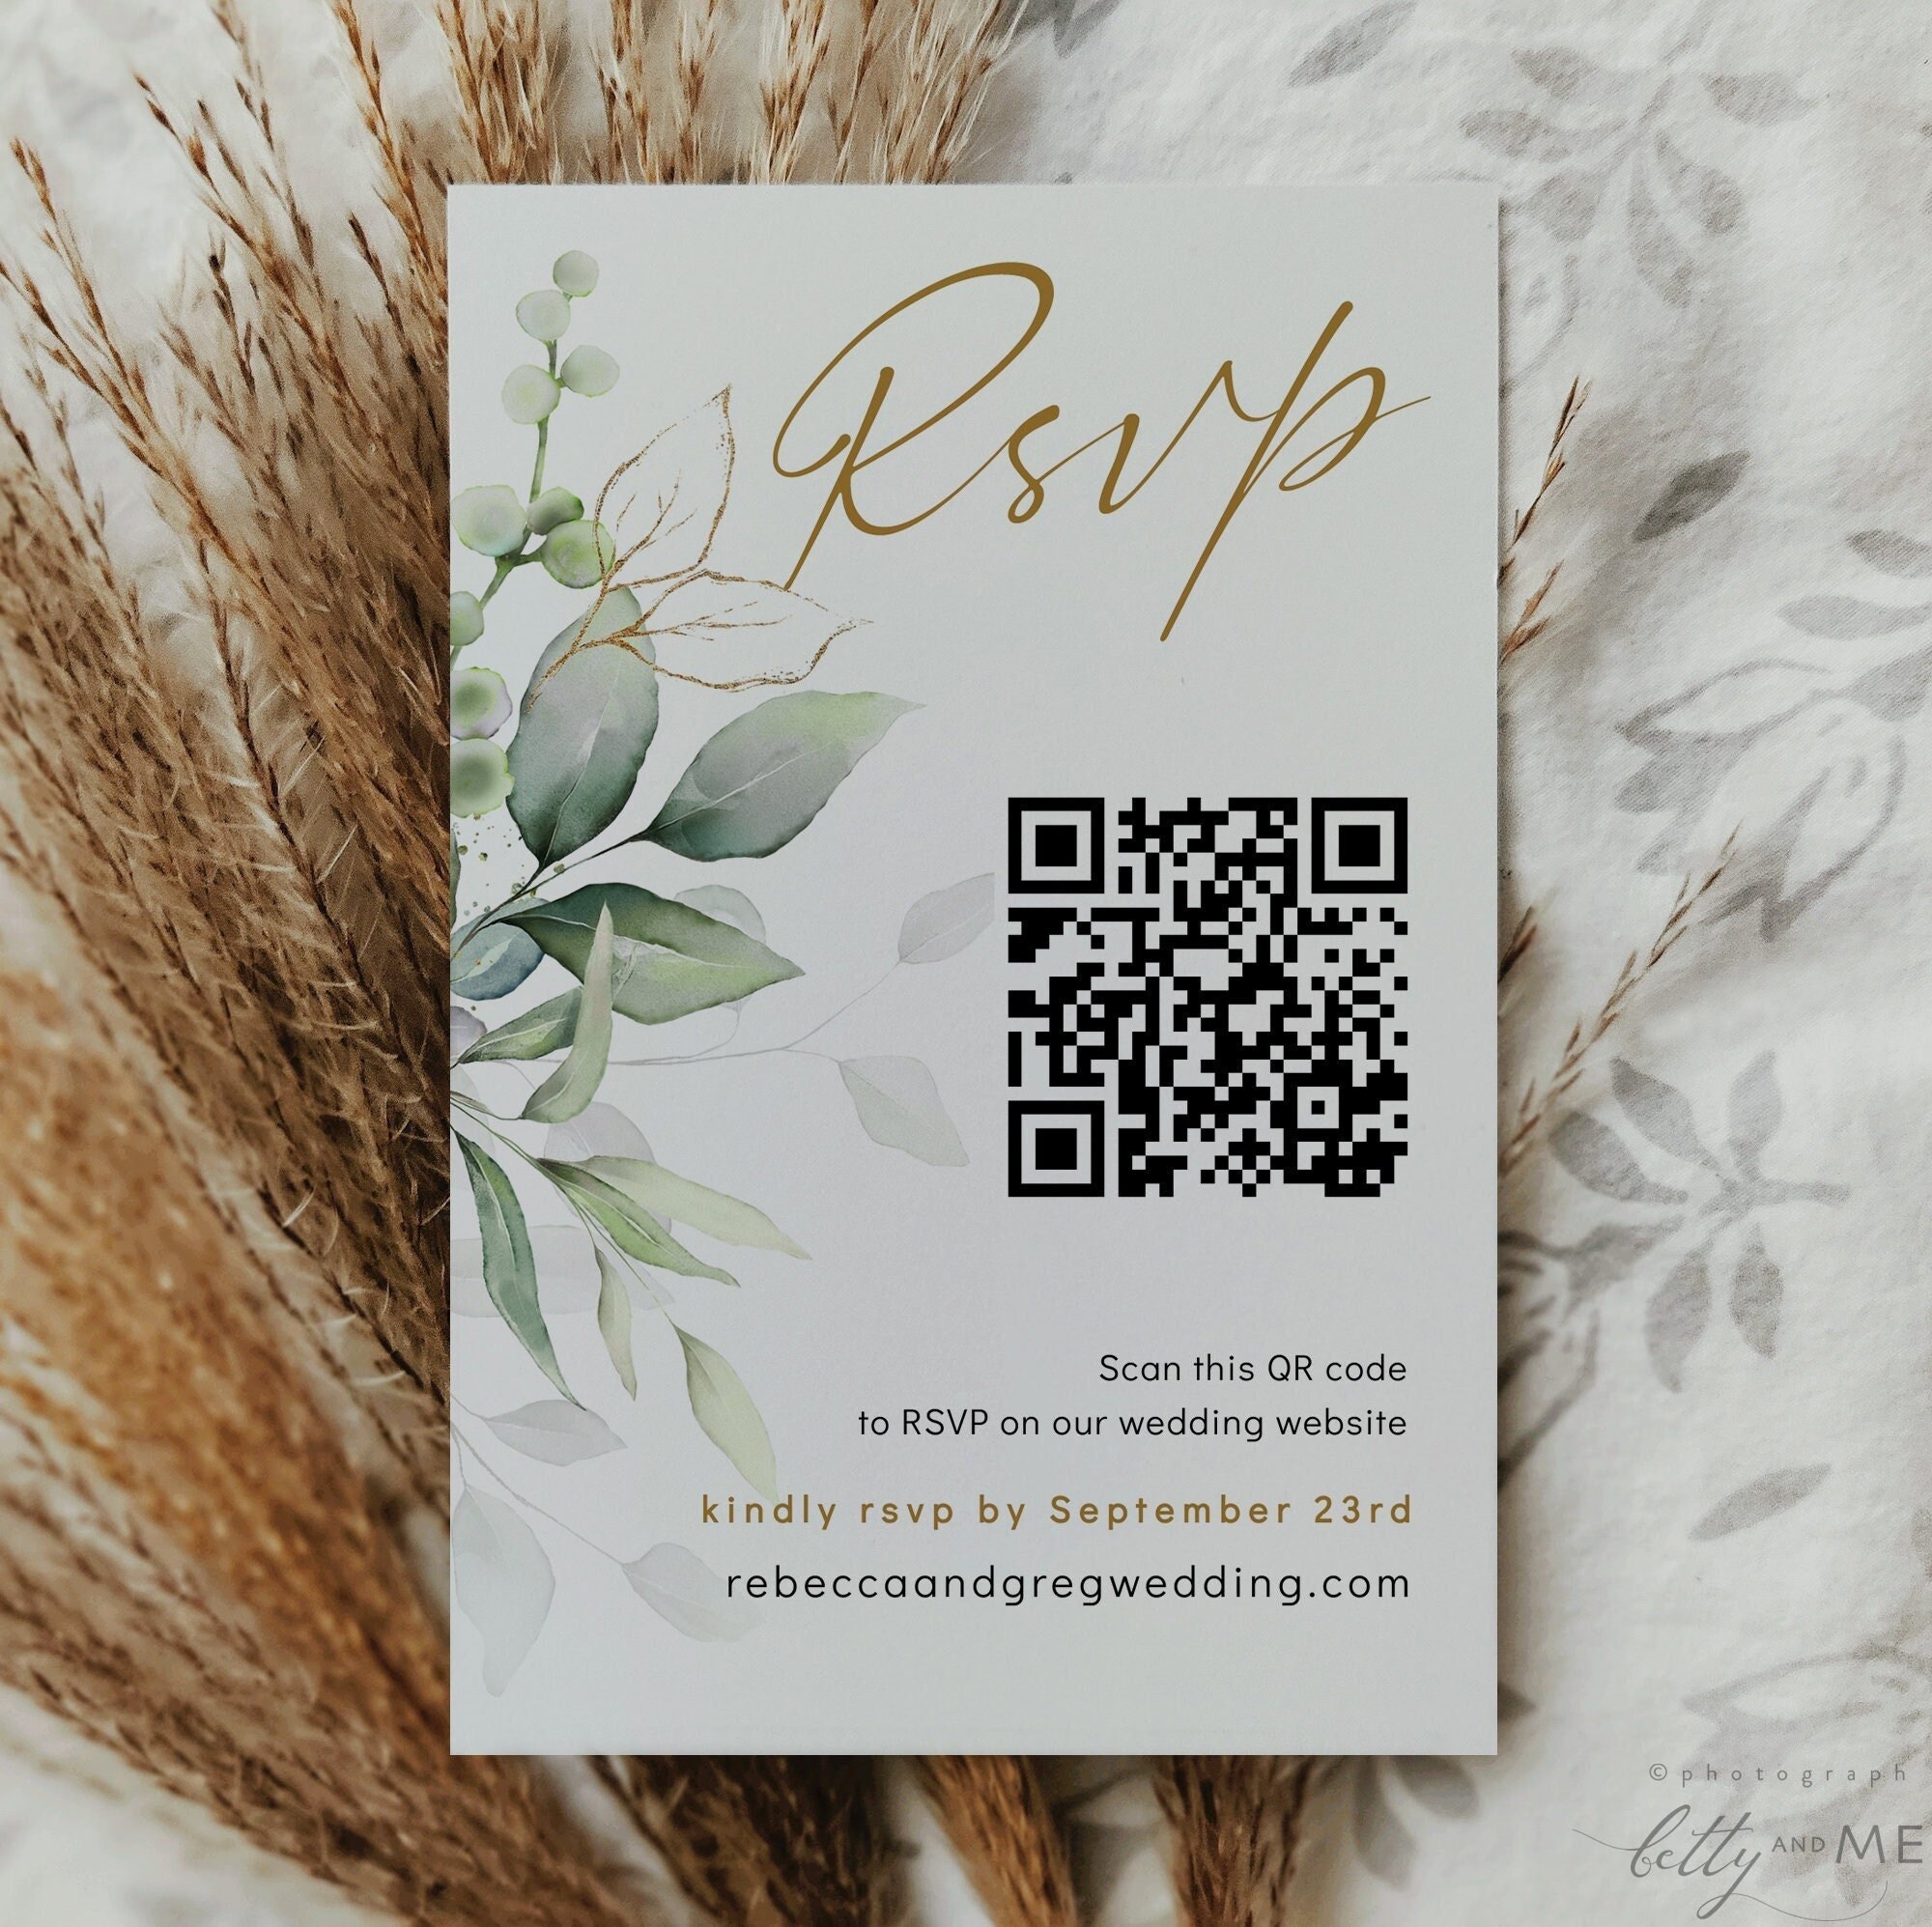 Greenery Rsvp Card With QR Code Wedding Rsvp QR Code Scan To Rsvp 